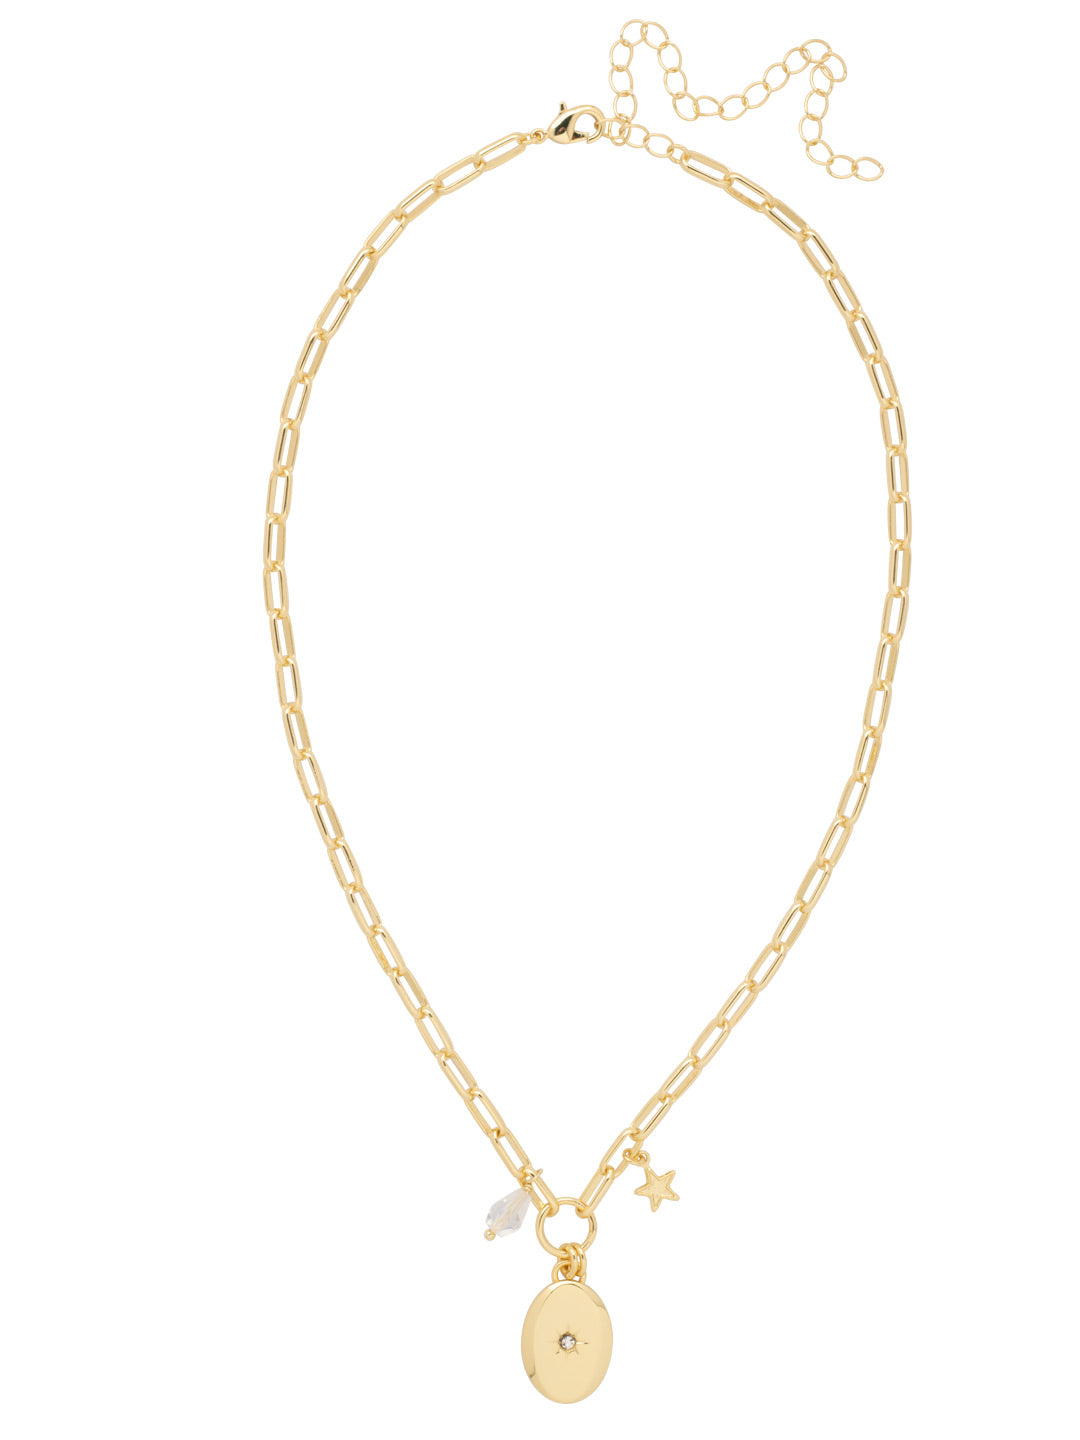 Charmed Pendant Necklace - 4NFJ5BGCRY - <p>The Charmed Pendant Necklace features an oval disk pendant engraved with a crystal embellished star. Attached on either side of the pendant is a clear bead charm and a metal star charm. From Sorrelli's Crystal collection in our Bright Gold-tone finish.</p>